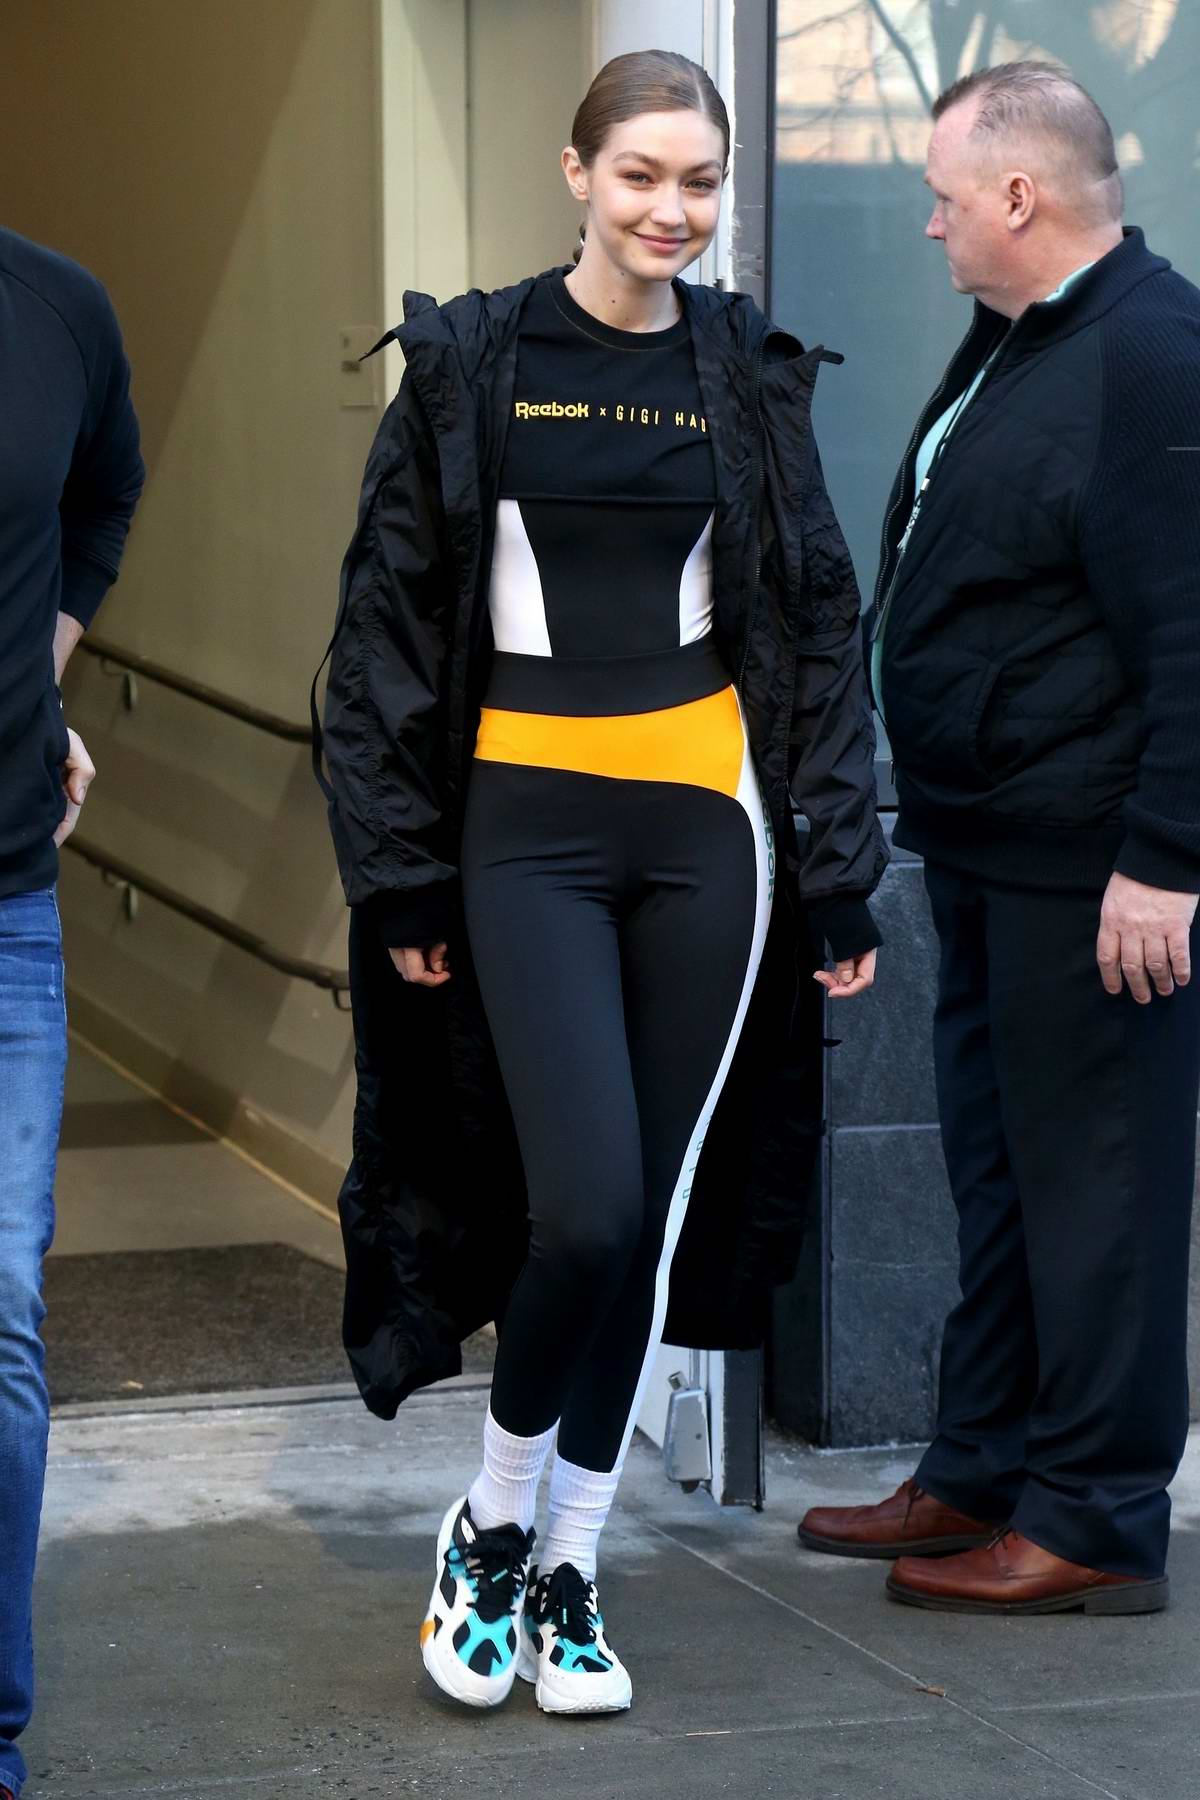 Gigi Hadid is all smiles while exiting 